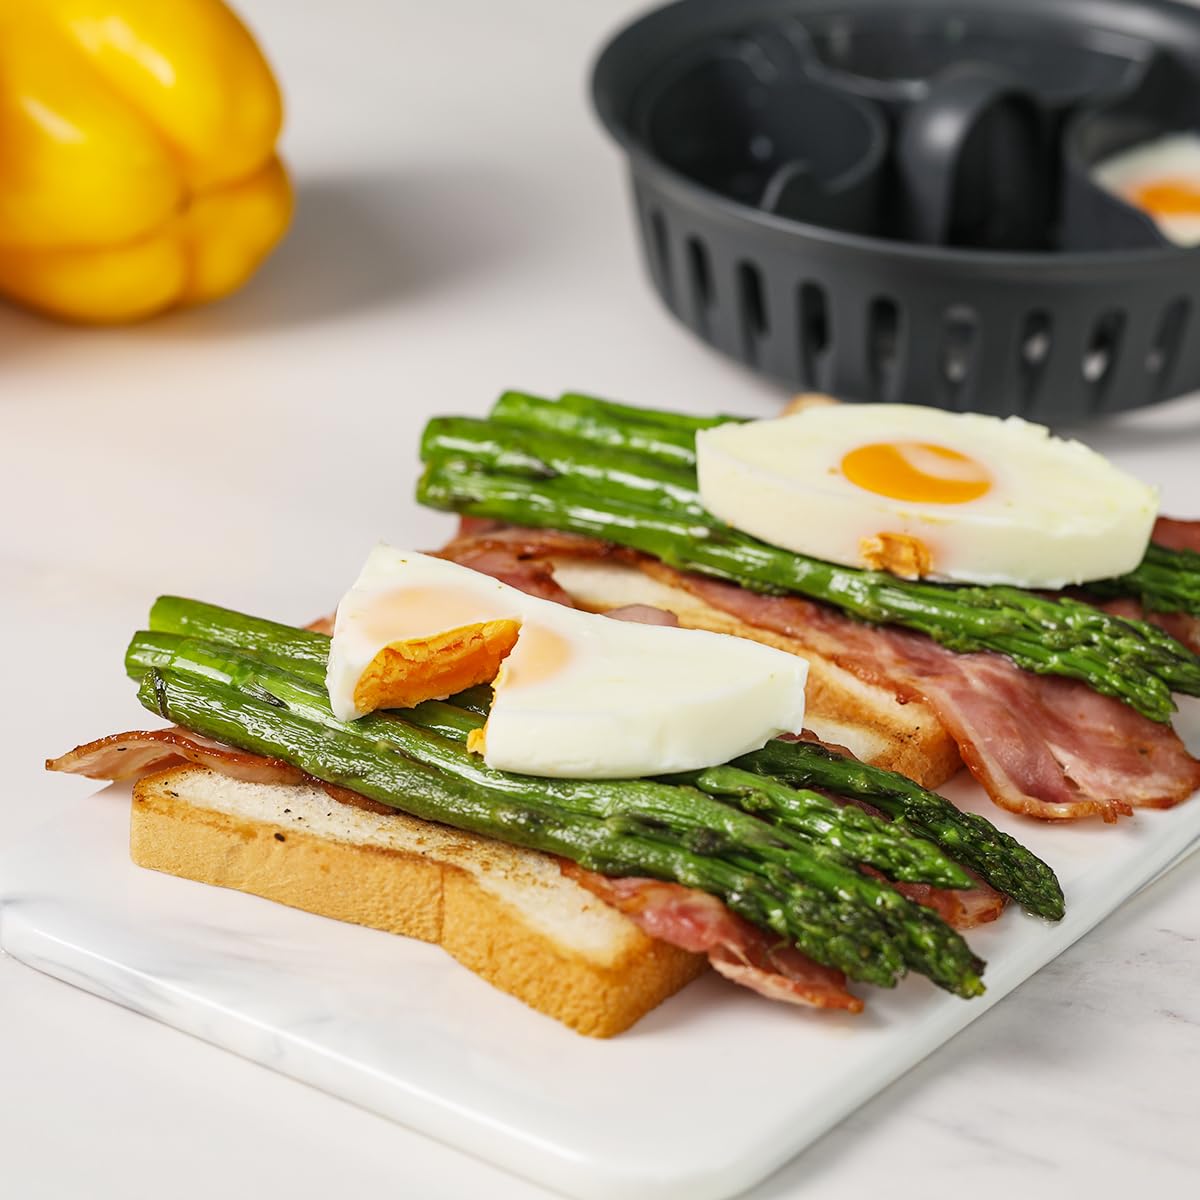 You can create your own special boiled eggs by adding various toppings such as vegetables, cheese and ham into the mold.